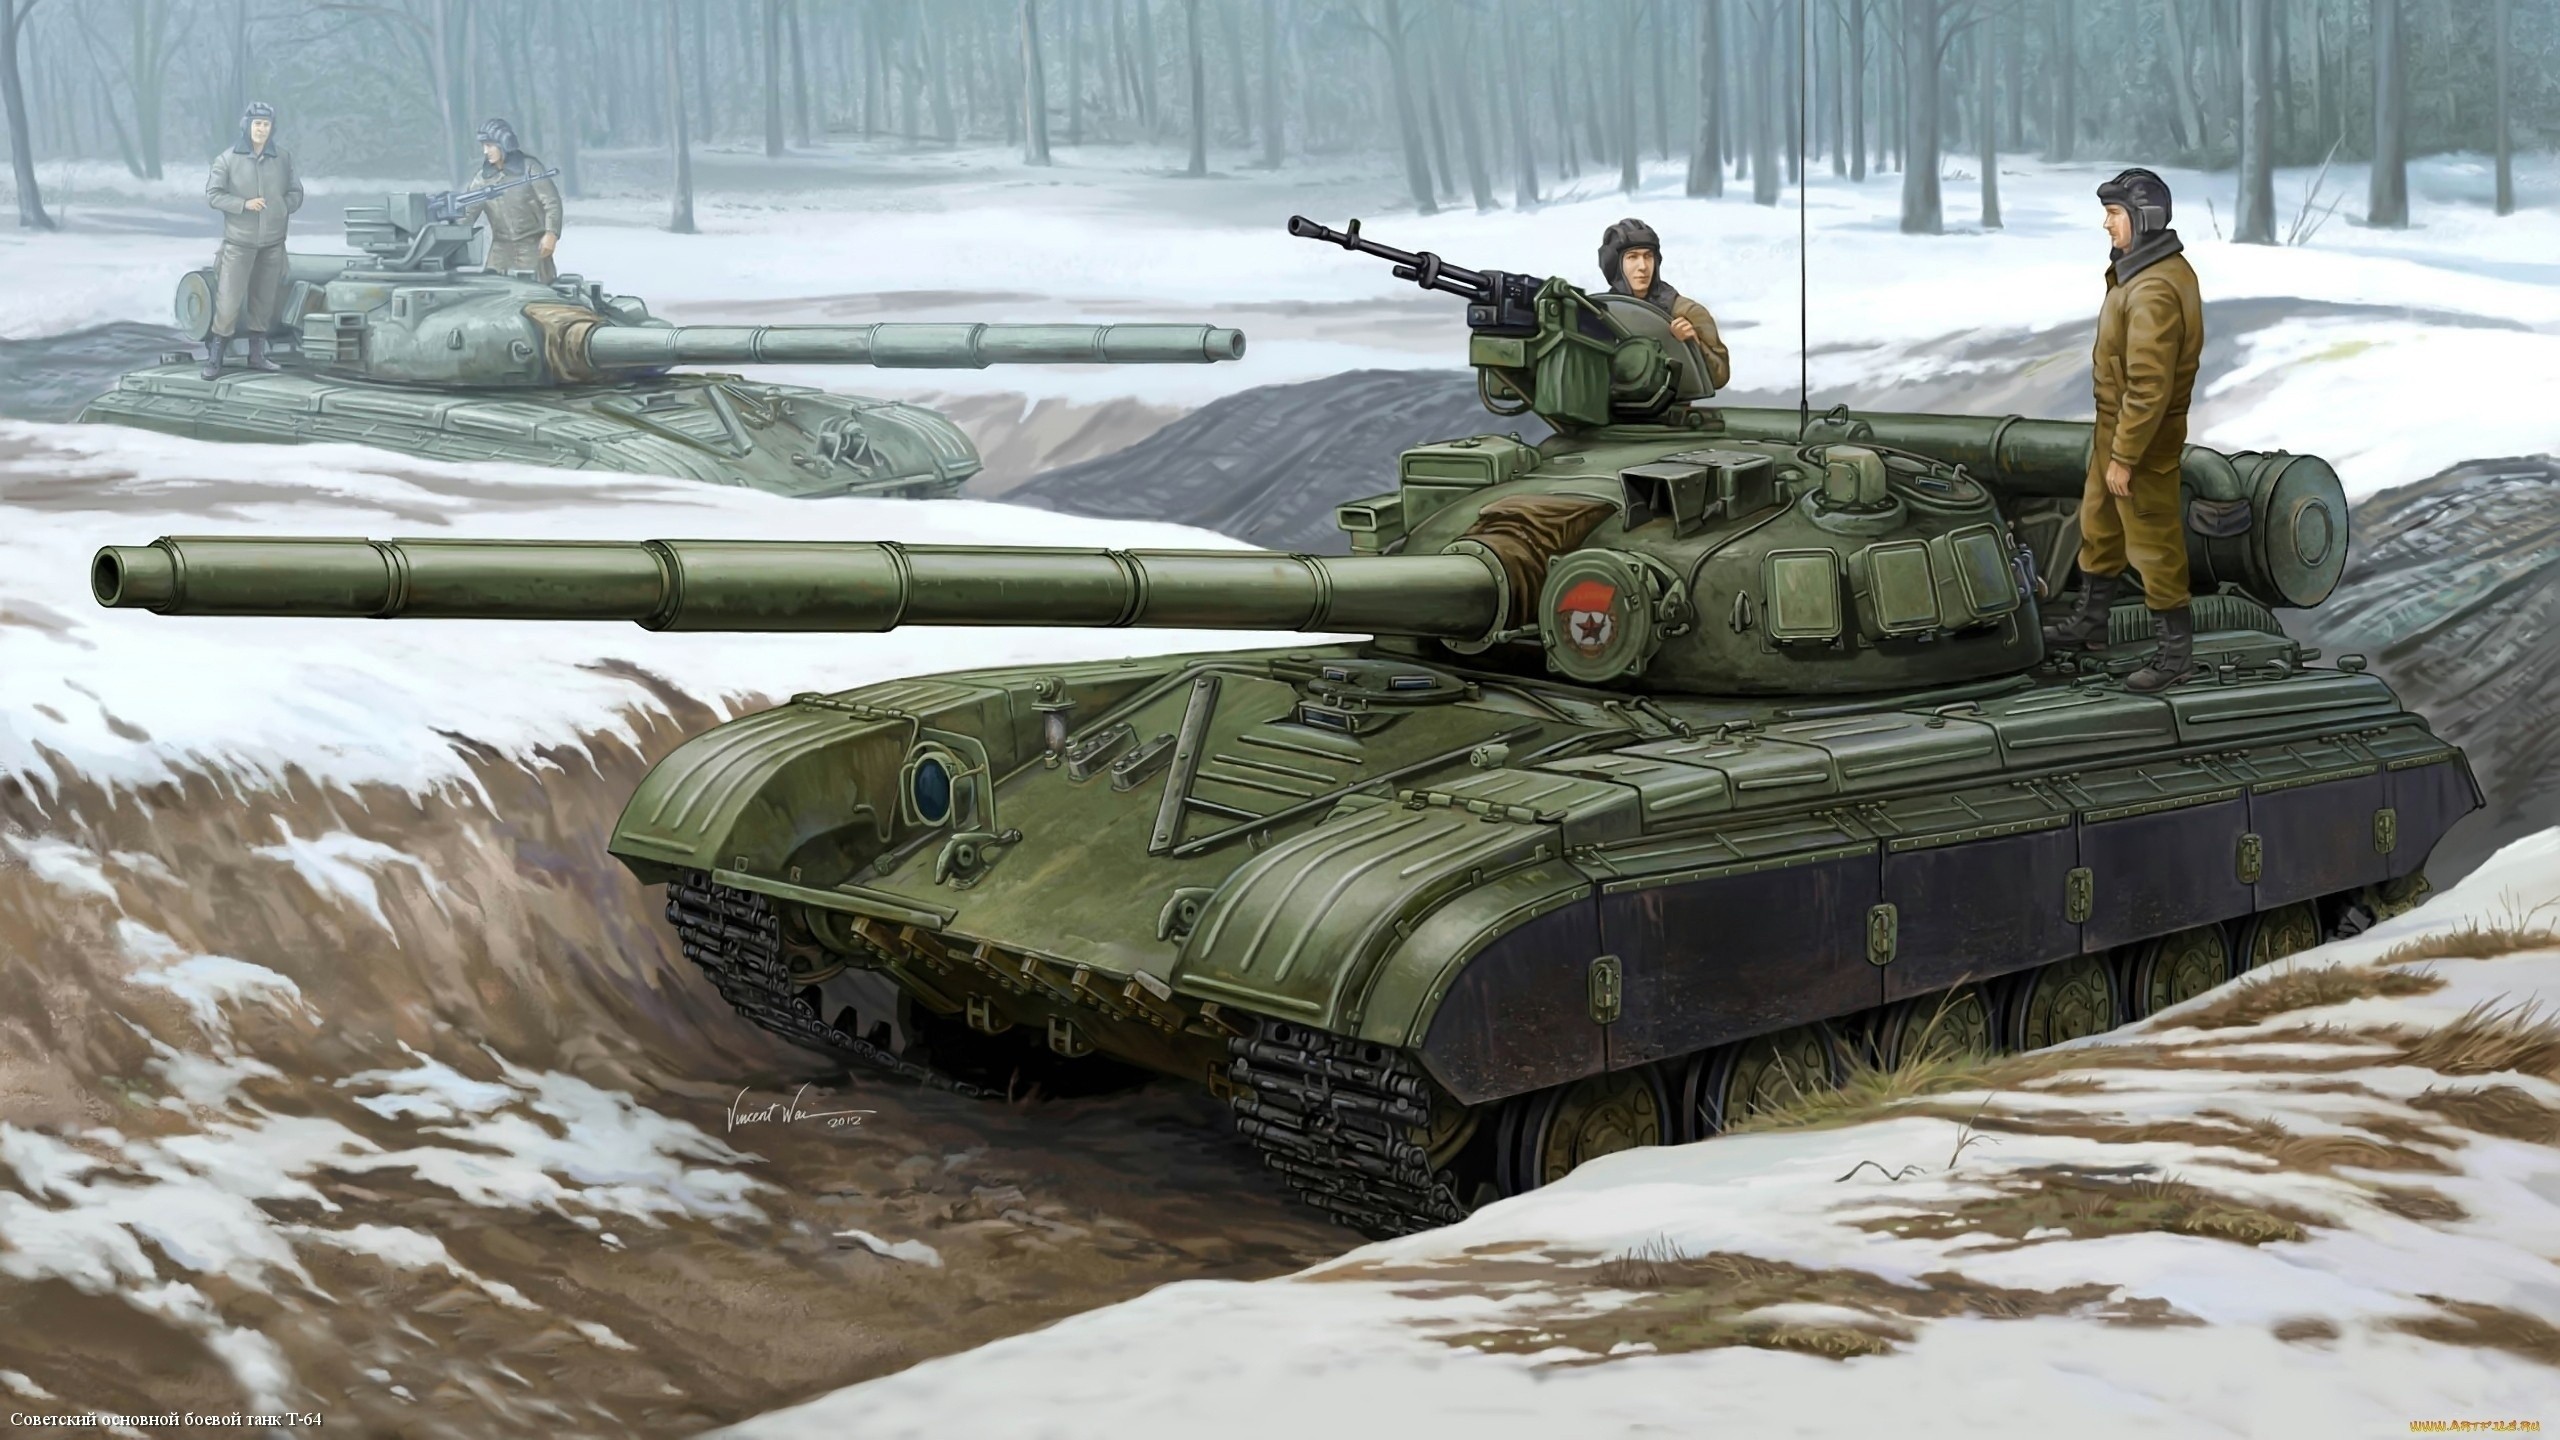 General 2560x1440 tank military winter snow forest artwork war soldier vehicle military vehicle Soviet Army USSR Vincent Wai T-64 trenches Boxart signature watermarked Russian/Soviet aircraft digital art